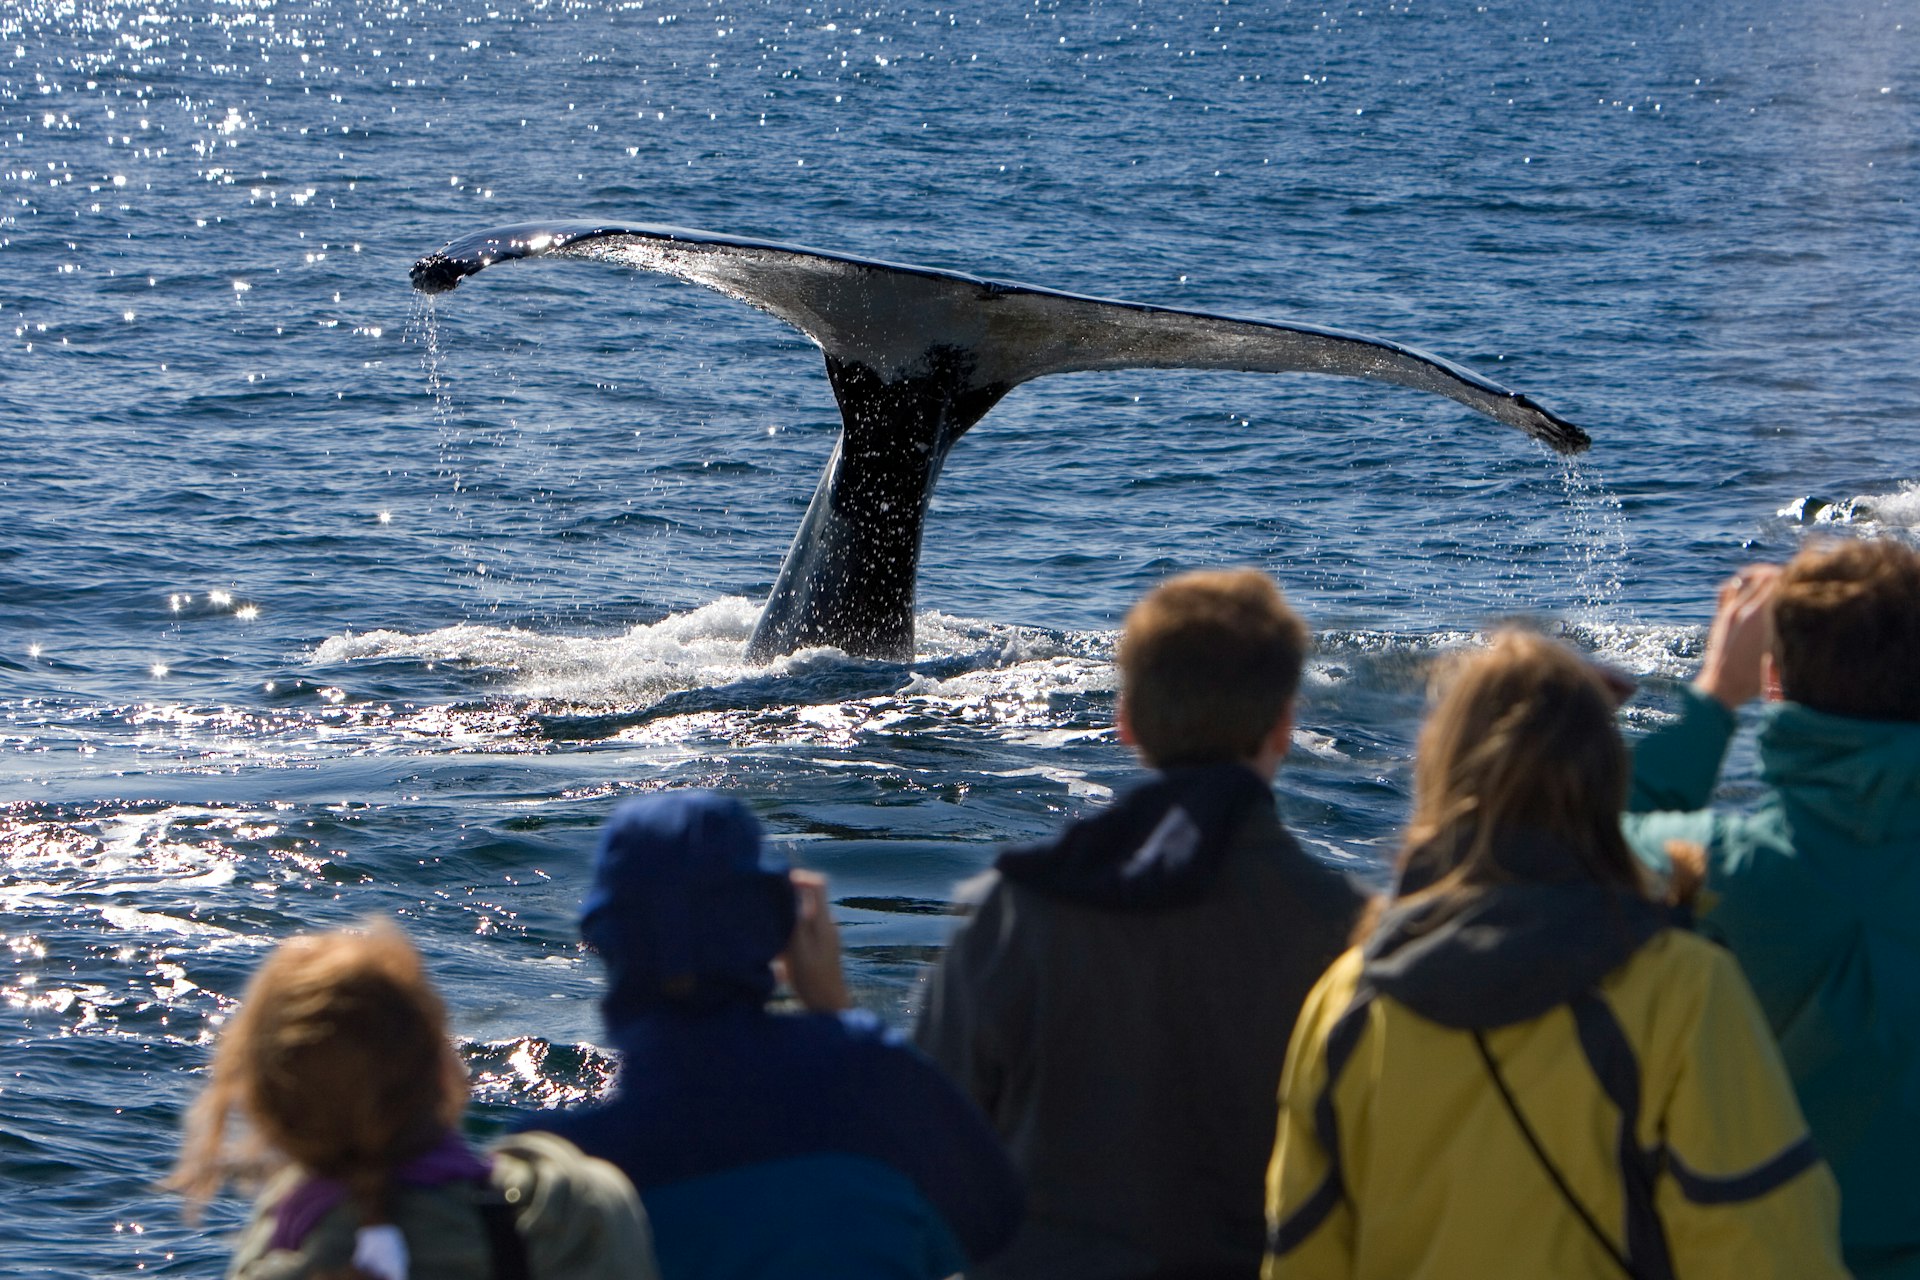 A group of people in a boat watch the large tail of a whale descend into the sea.